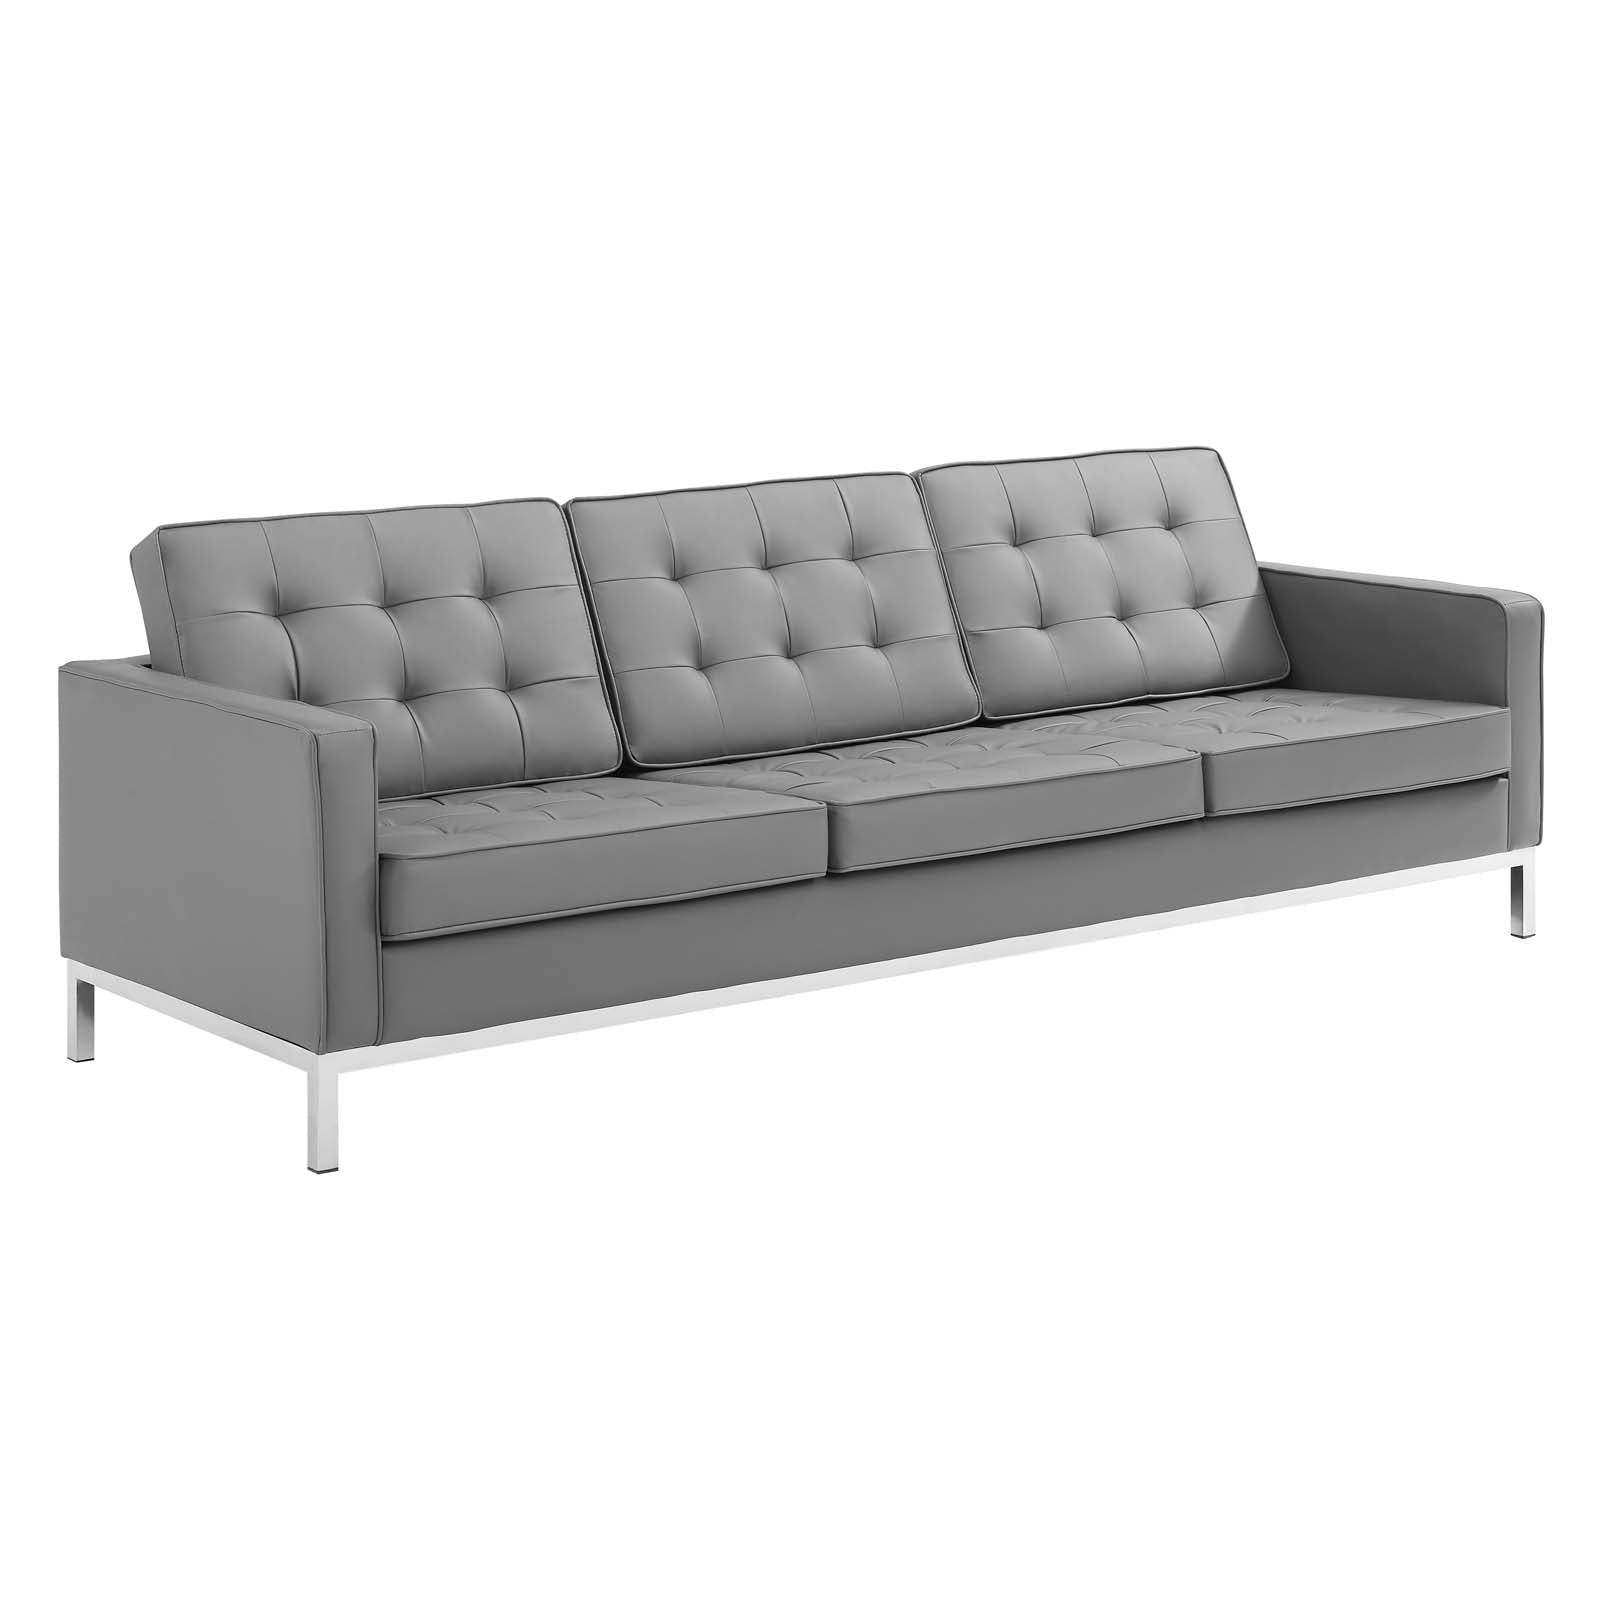 Modway Living Room Sets - Loft-Tufted-Upholstered-Faux-Leather-3-Piece-Set-Silver-Gray